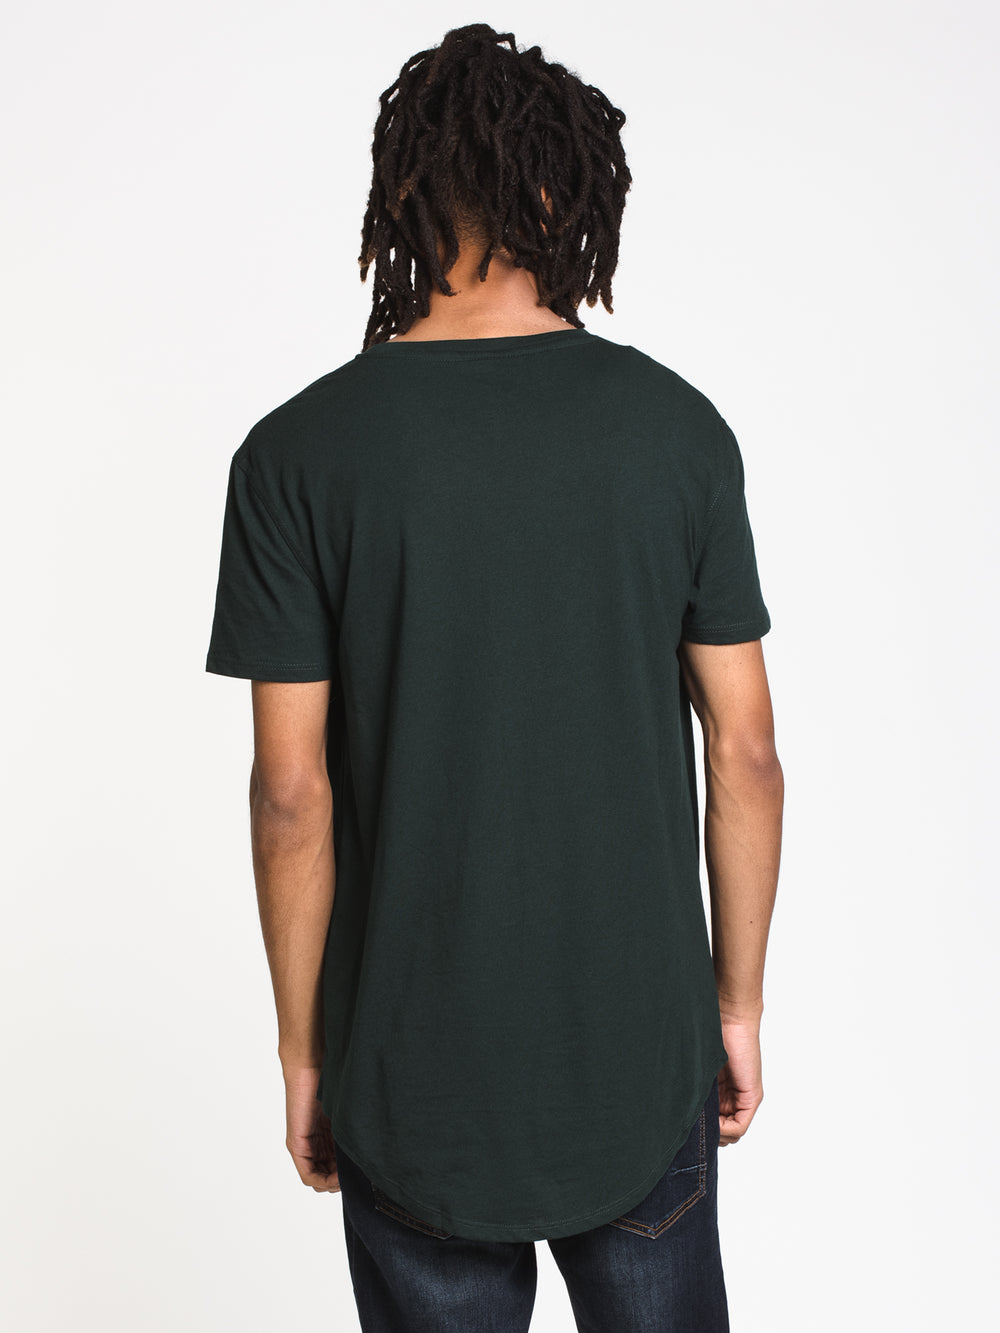 MENS LONGLINE T - FOREST - CLEARANCE